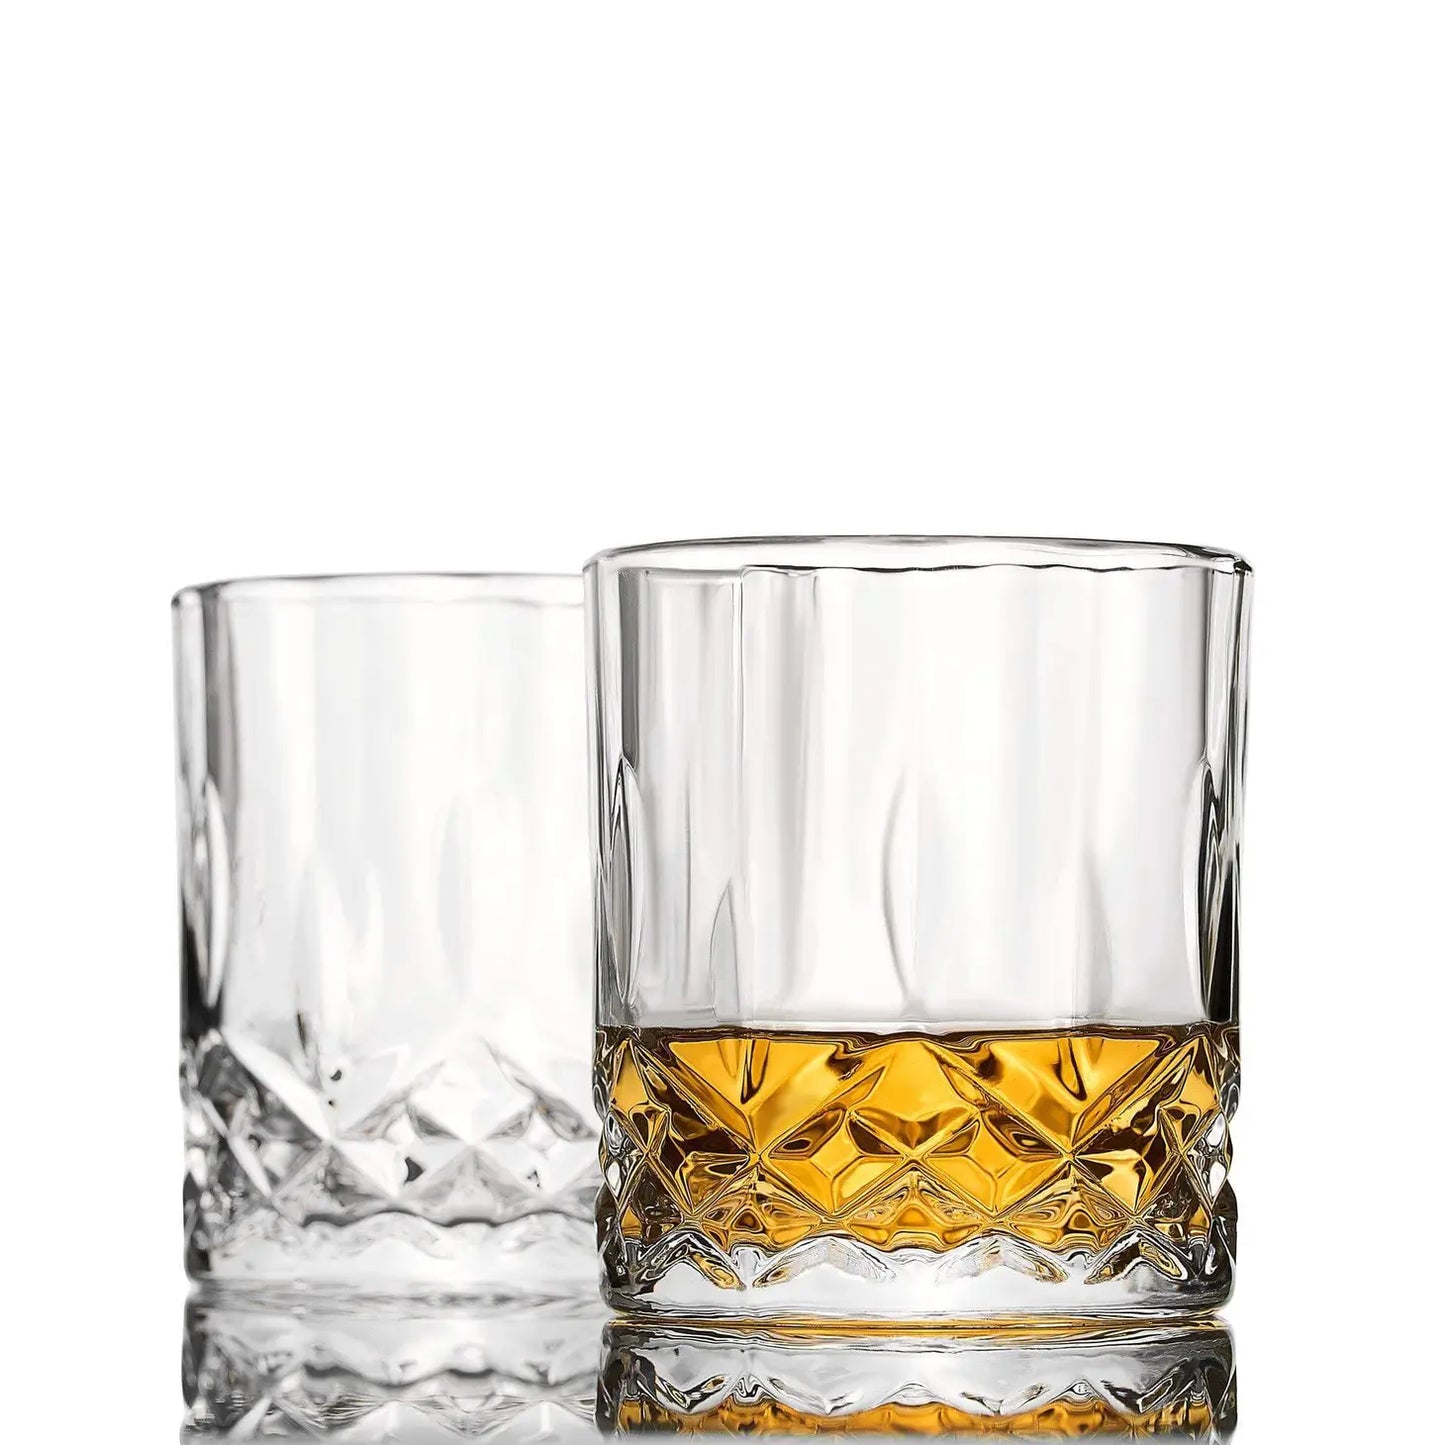 The Connoisseur's Set - Signature Whiskey Glass Edition